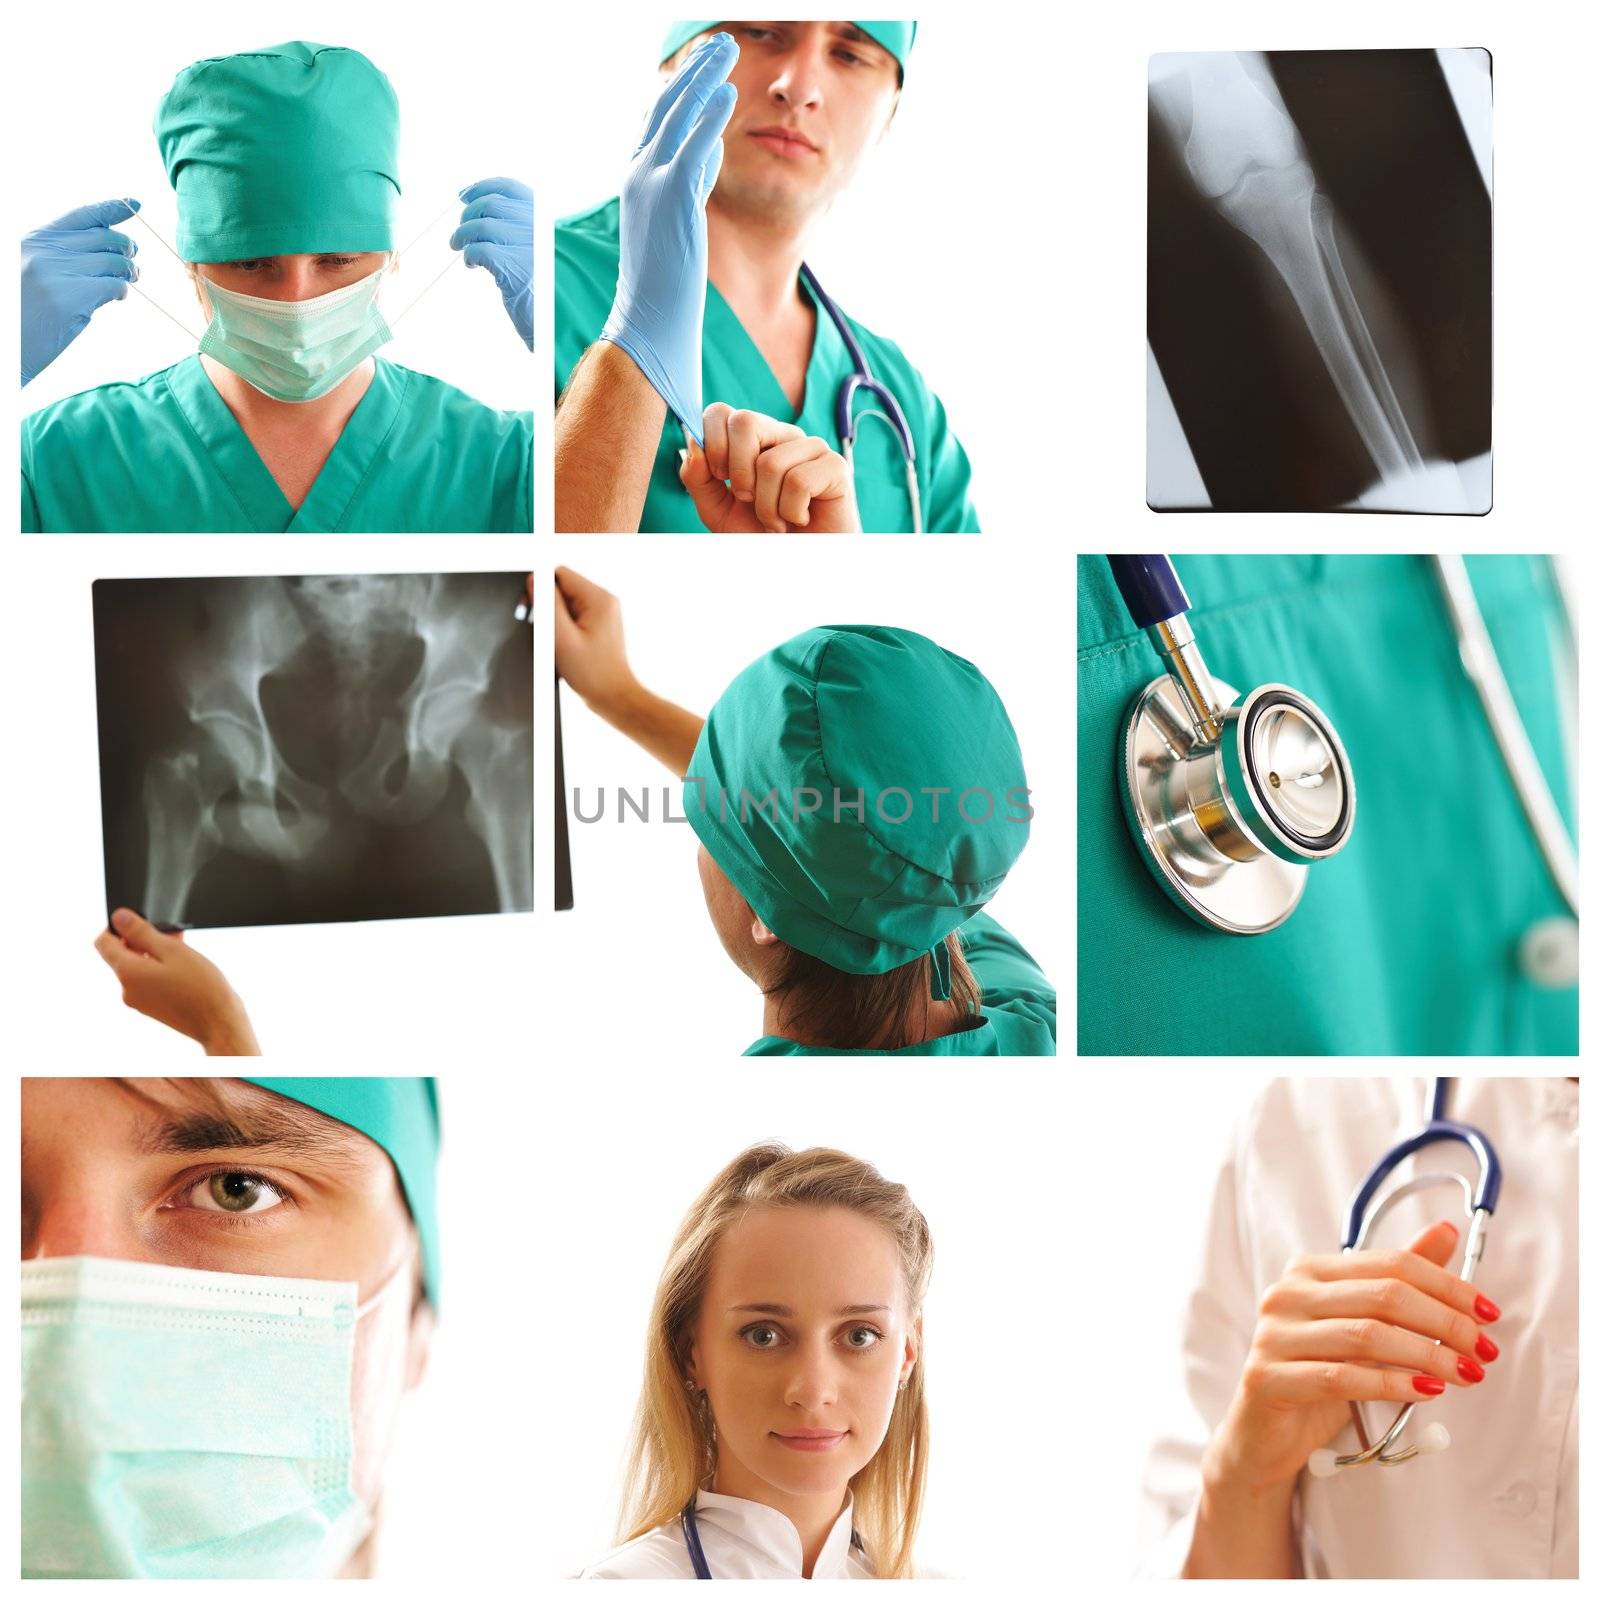 Collage made with medical related images